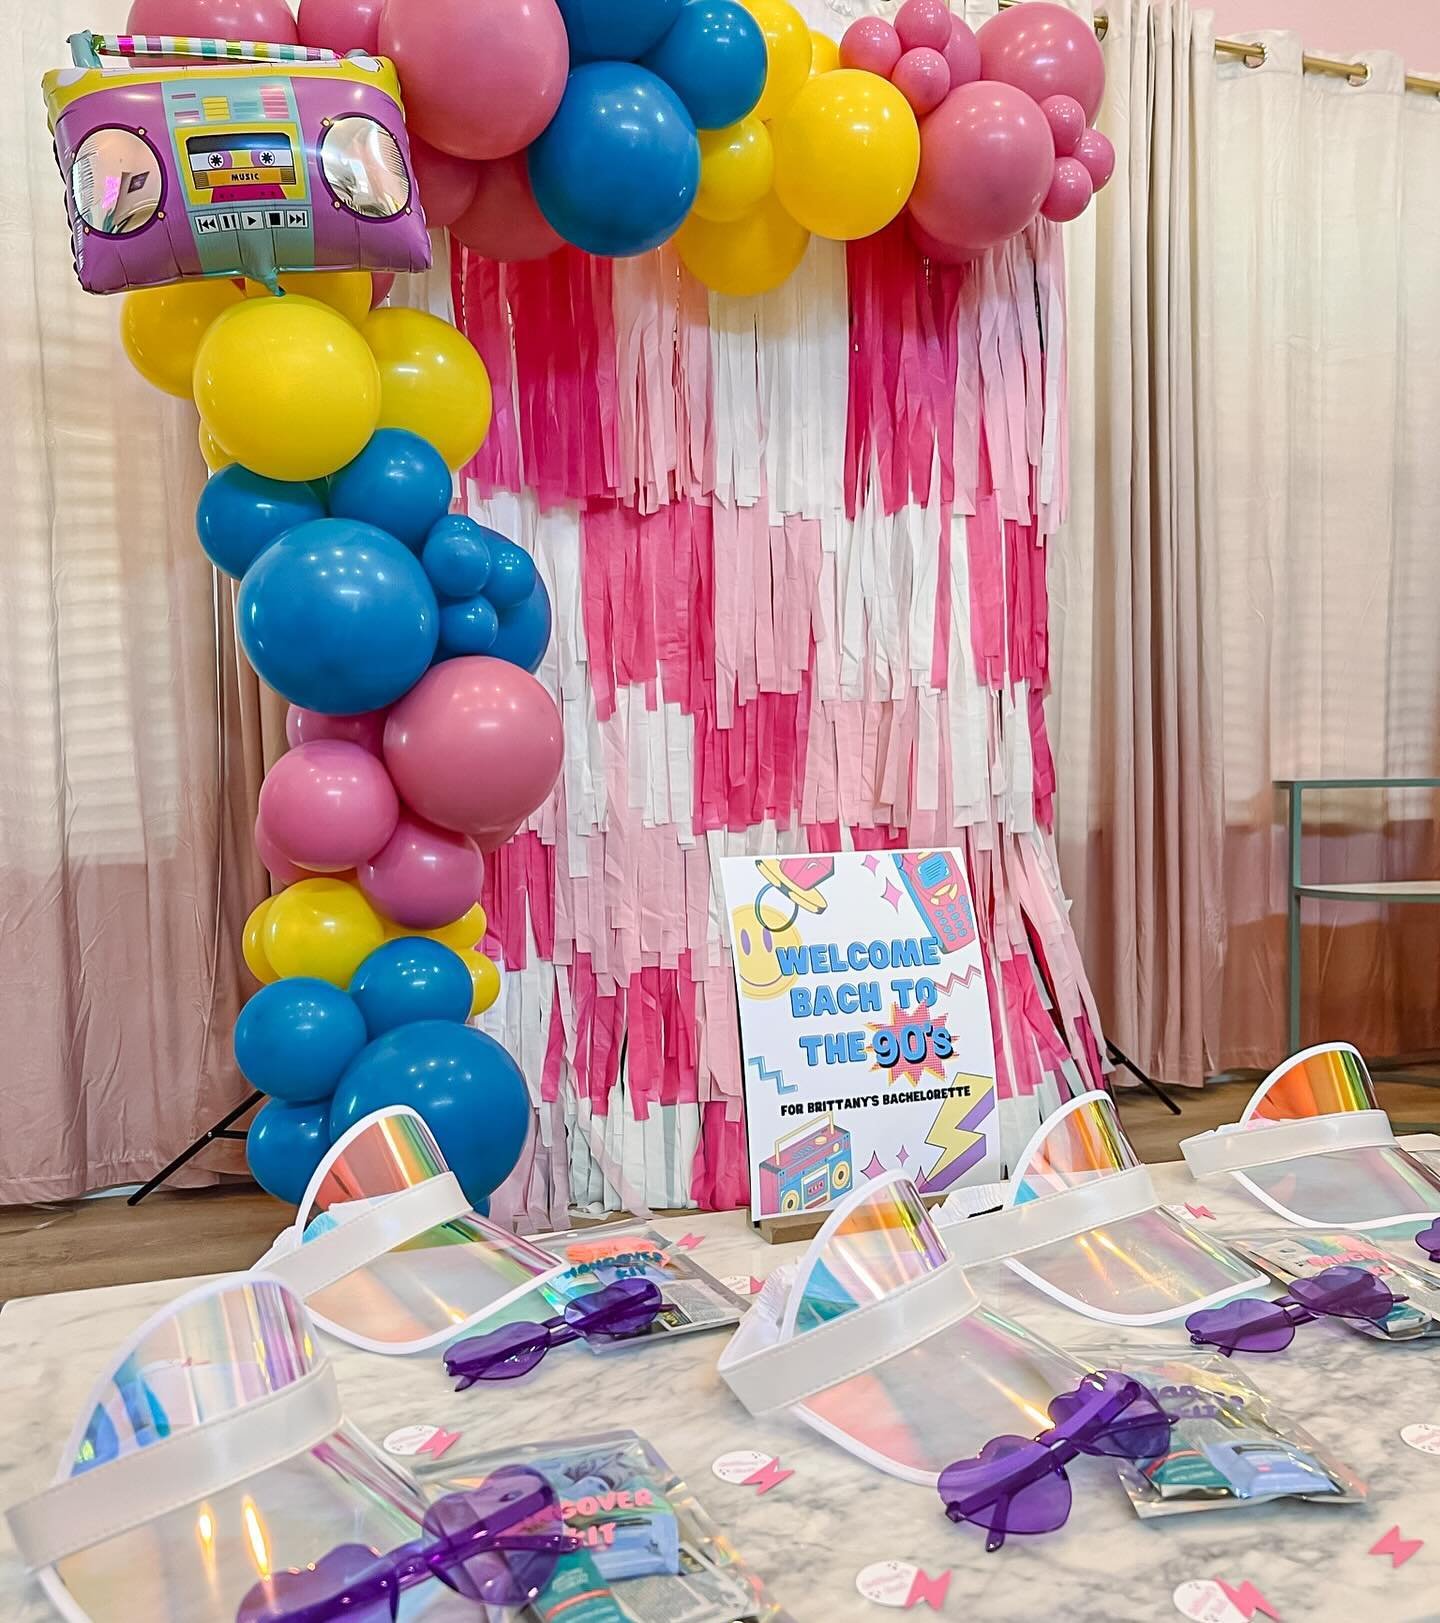 BACH TO THE 90&rsquo;s ⚡️🚀 How cute is this throwback themed party 🤩

#thebachplan #bachelorettebags #bachelorettepartydecor #bachtothe90s #austintexas #nashville #partyplanning #2025bride #bachloretteweekend